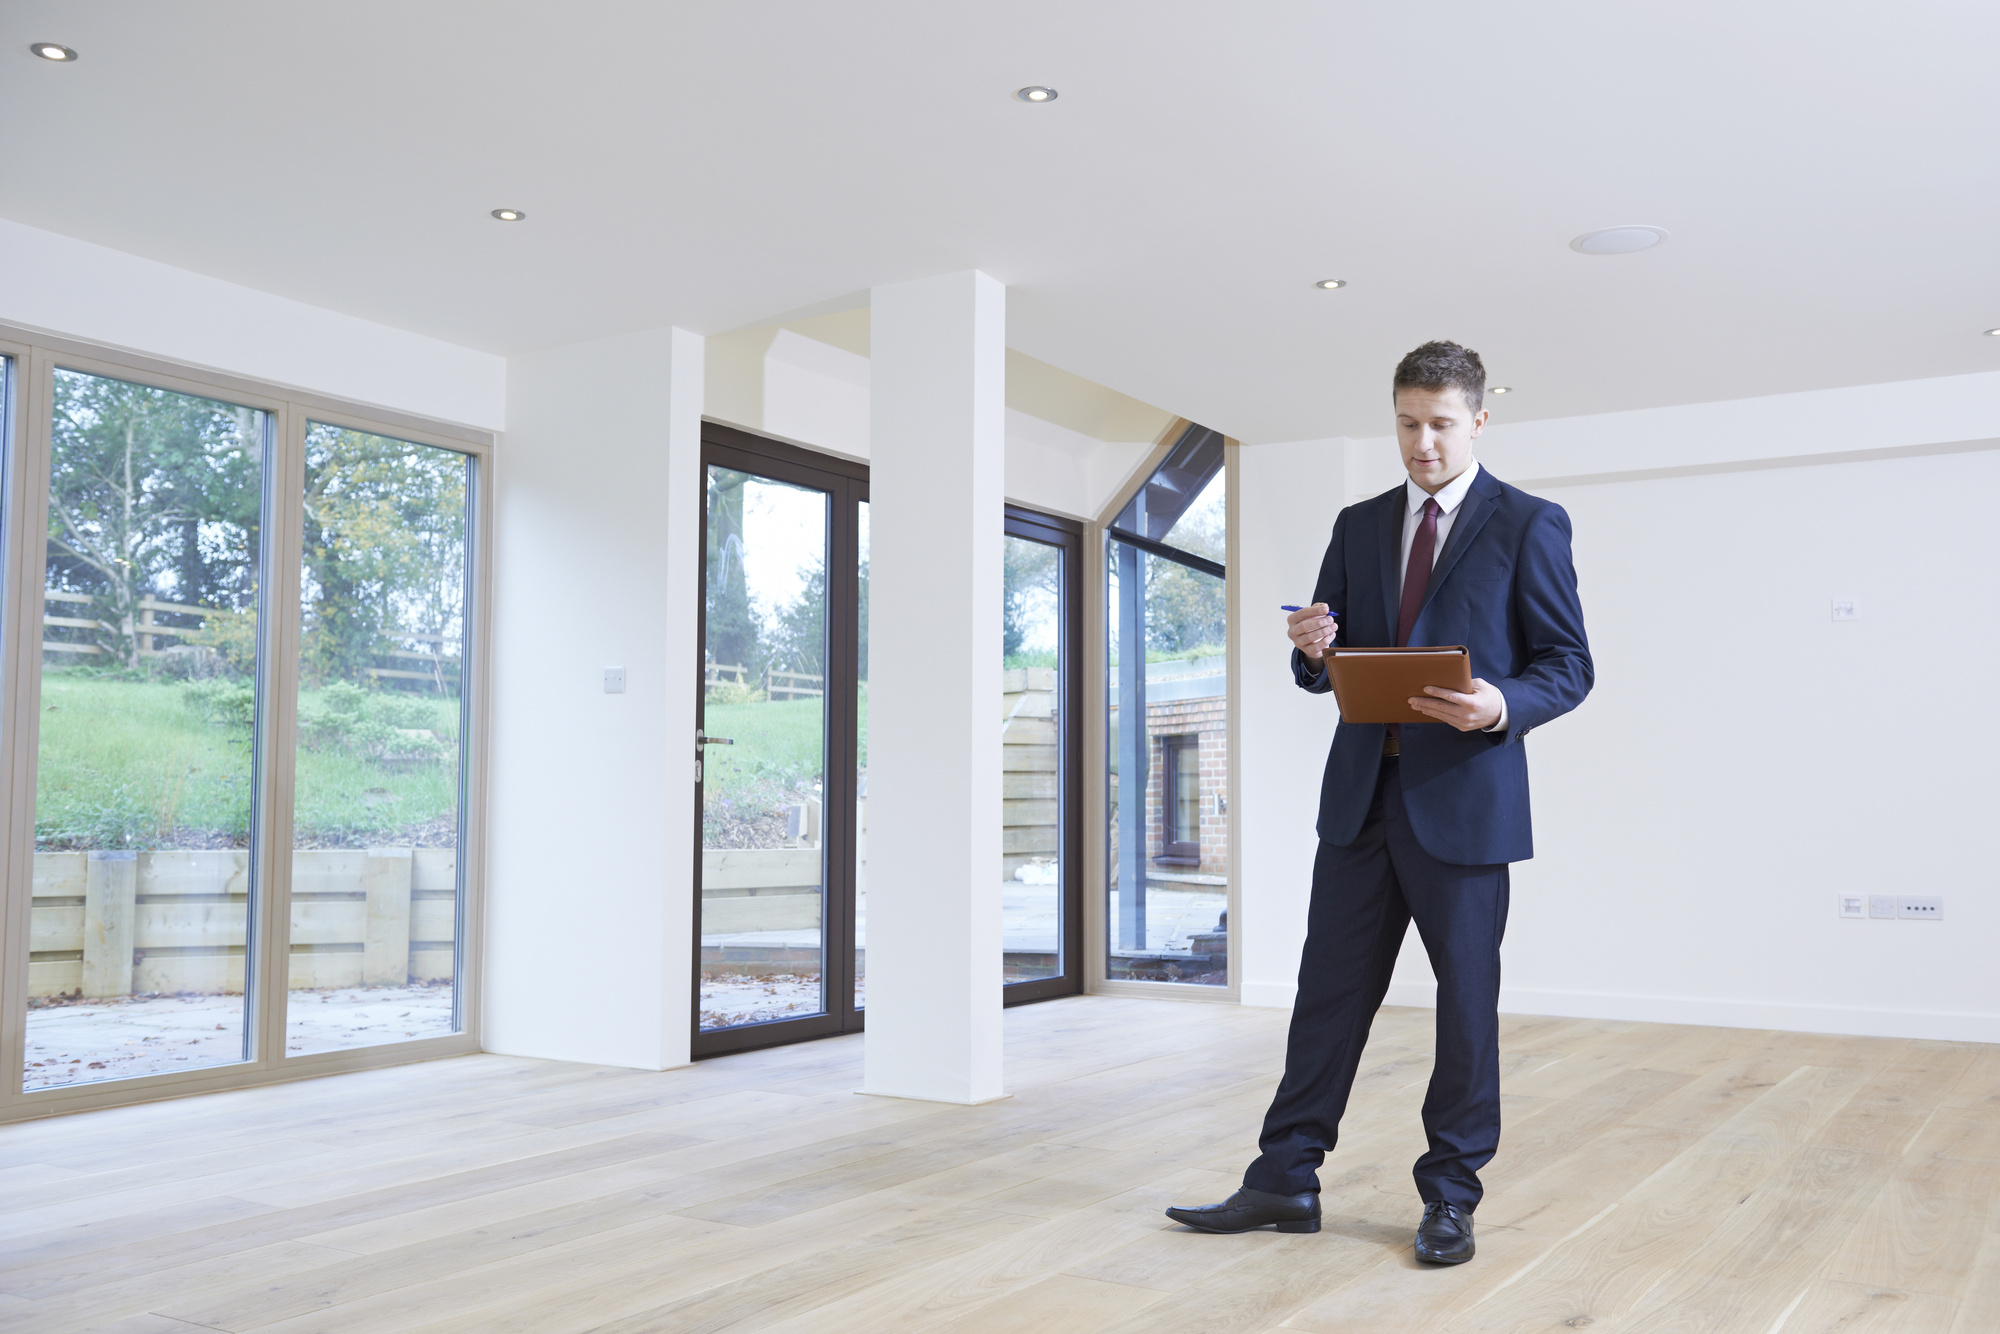 7 Important Questions to Ask a Real Estate Agent Before Hiring